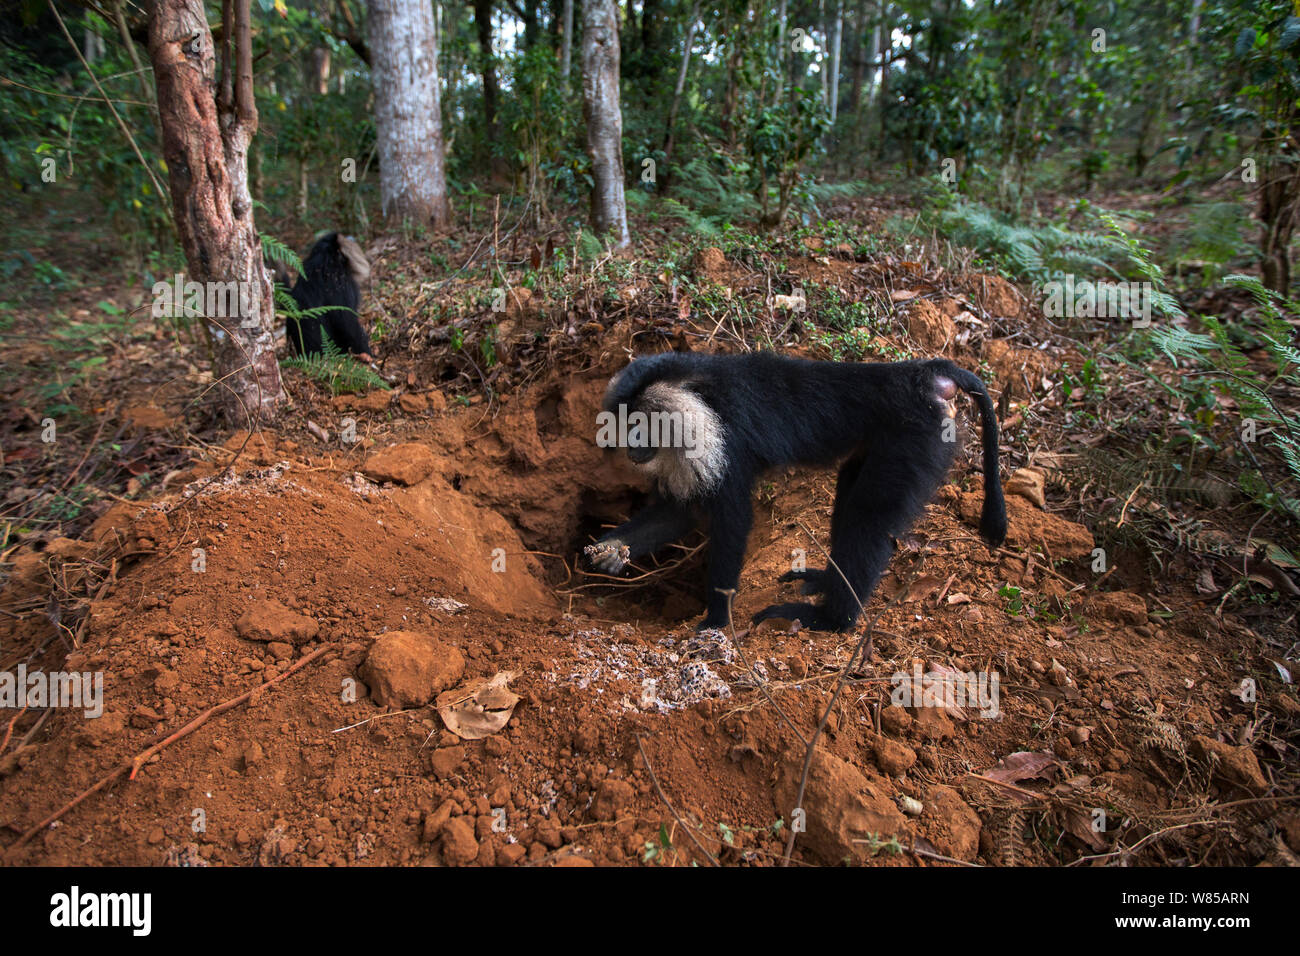 Lion-tailed macaques (Macaca silenus) raiding a termite nest for eggs. Anamalai Tiger Reserve, Western Ghats, Tamil Nadu, India. Stock Photo